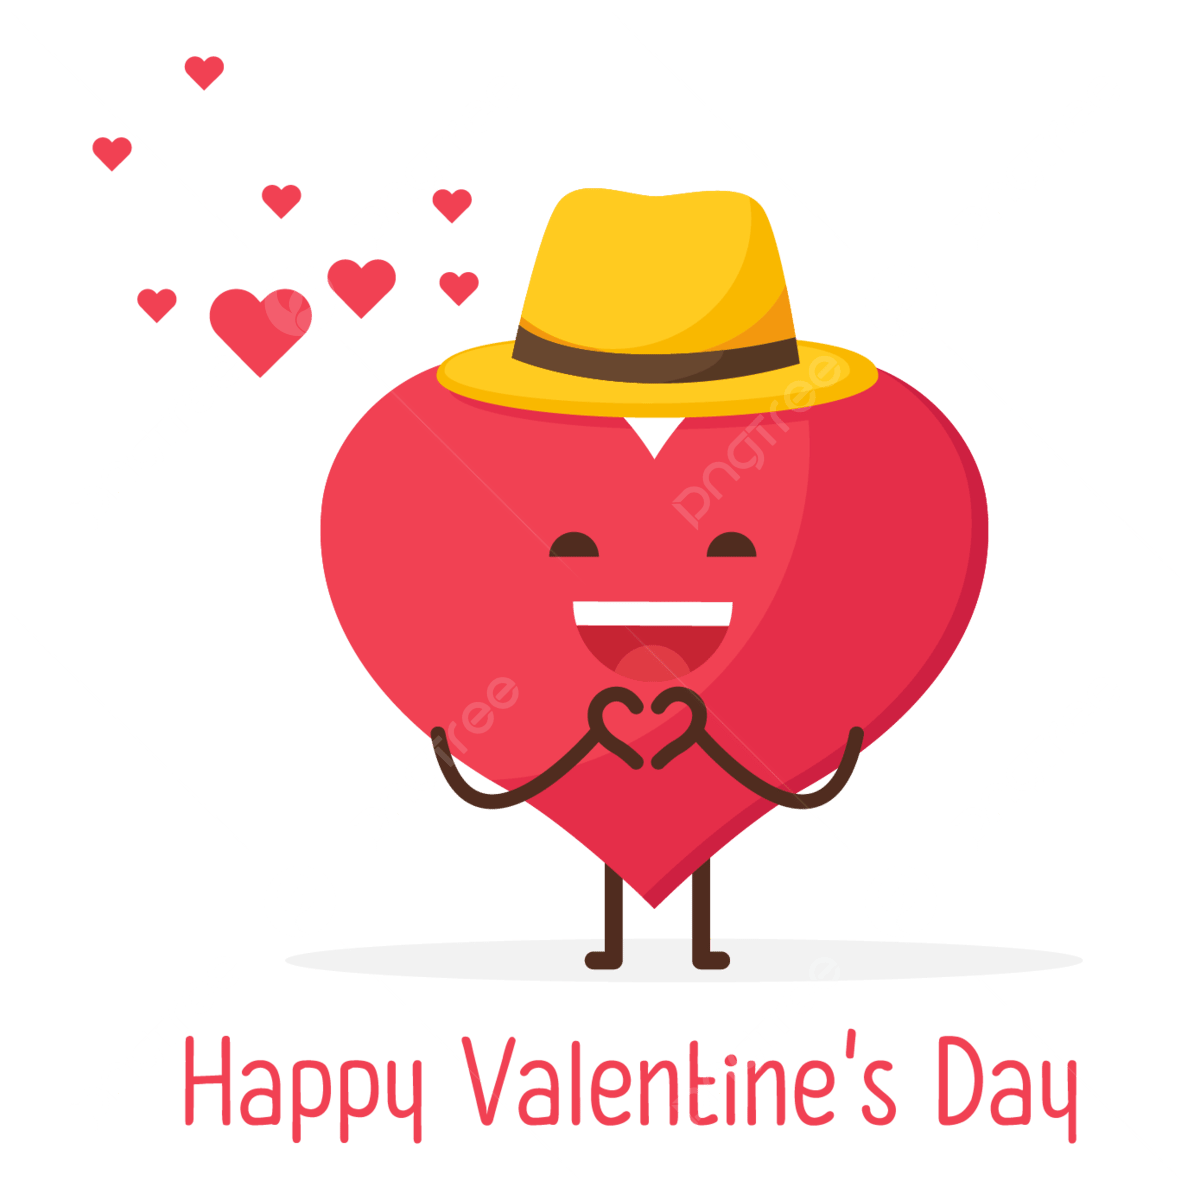 Love Valentines Day Vector Design Image, Cute Creative Love Wishes Happy Valentines Day, Modern Stylish, Creative Hand Drawn, Cartoon Couple PNG Image For Free Download